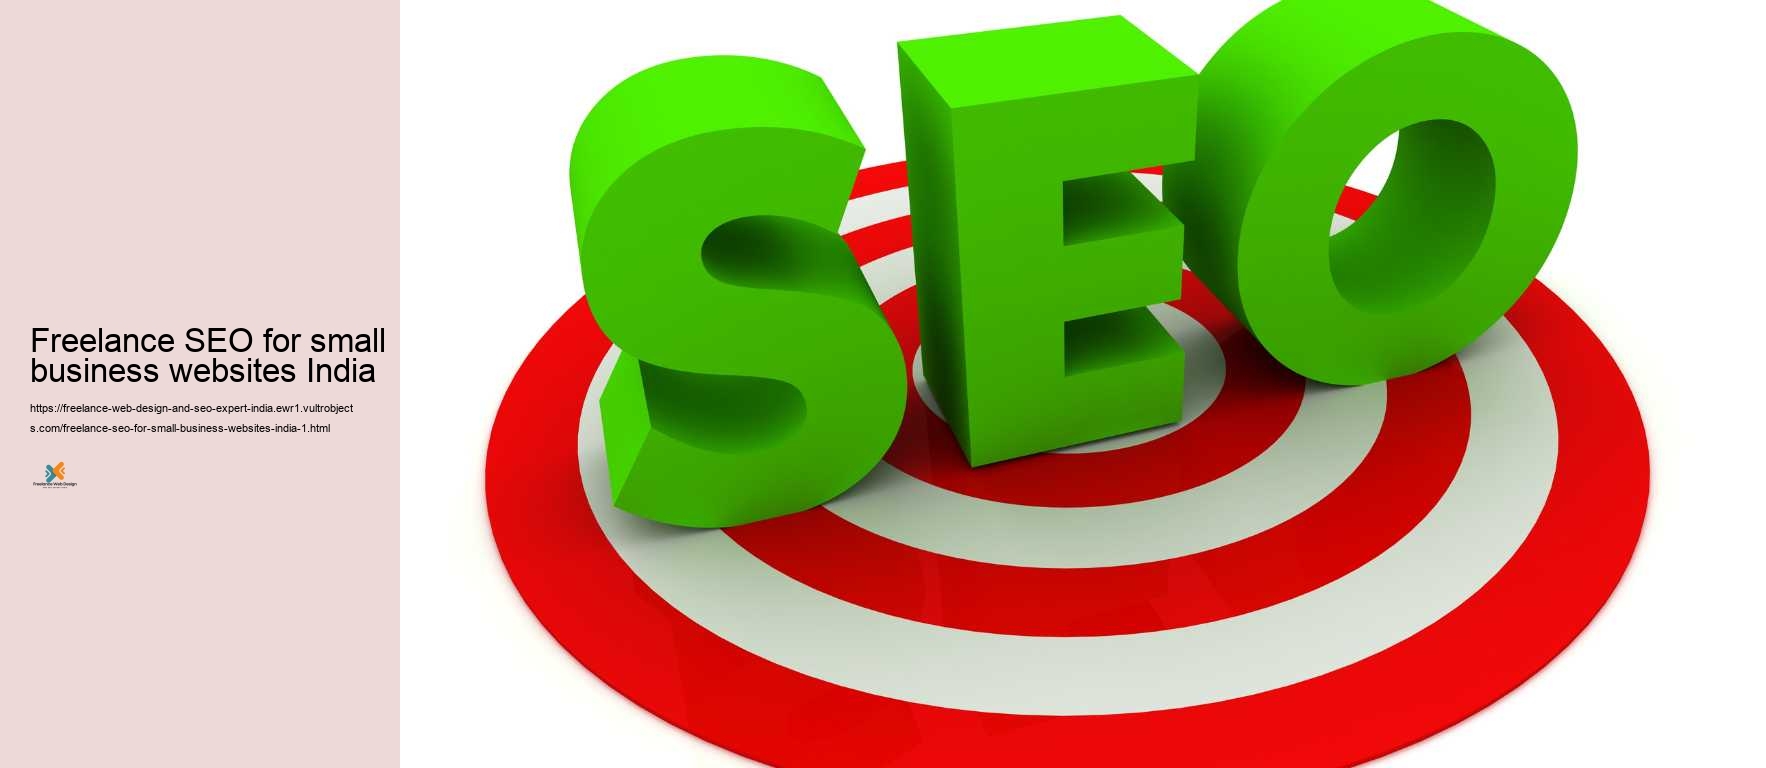 Freelance SEO for small business websites India